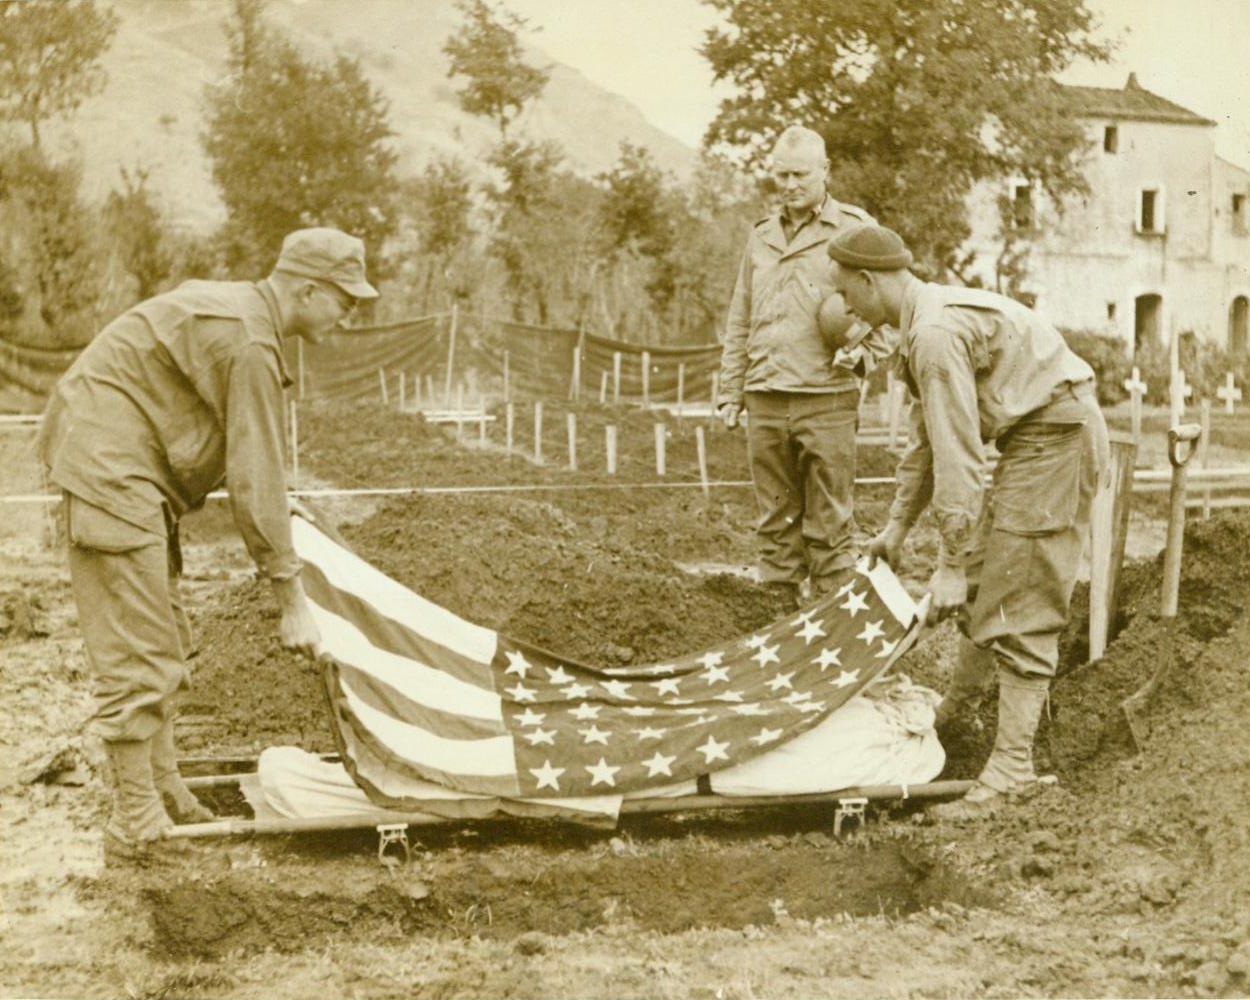 Last Rites in Italy, 12/19/1943. Italy—Capt. Christ A. Lehne, Lutheran minister from Fredericksburg, Texas, stands with bared head as two Fifth Army Fighters remove the stars and stripes from the body of a dead comrade. In the background, temporary markers and white crosses mark the resting places of other Americans who gave their lives in Italy. 12/19/43 (Acme);